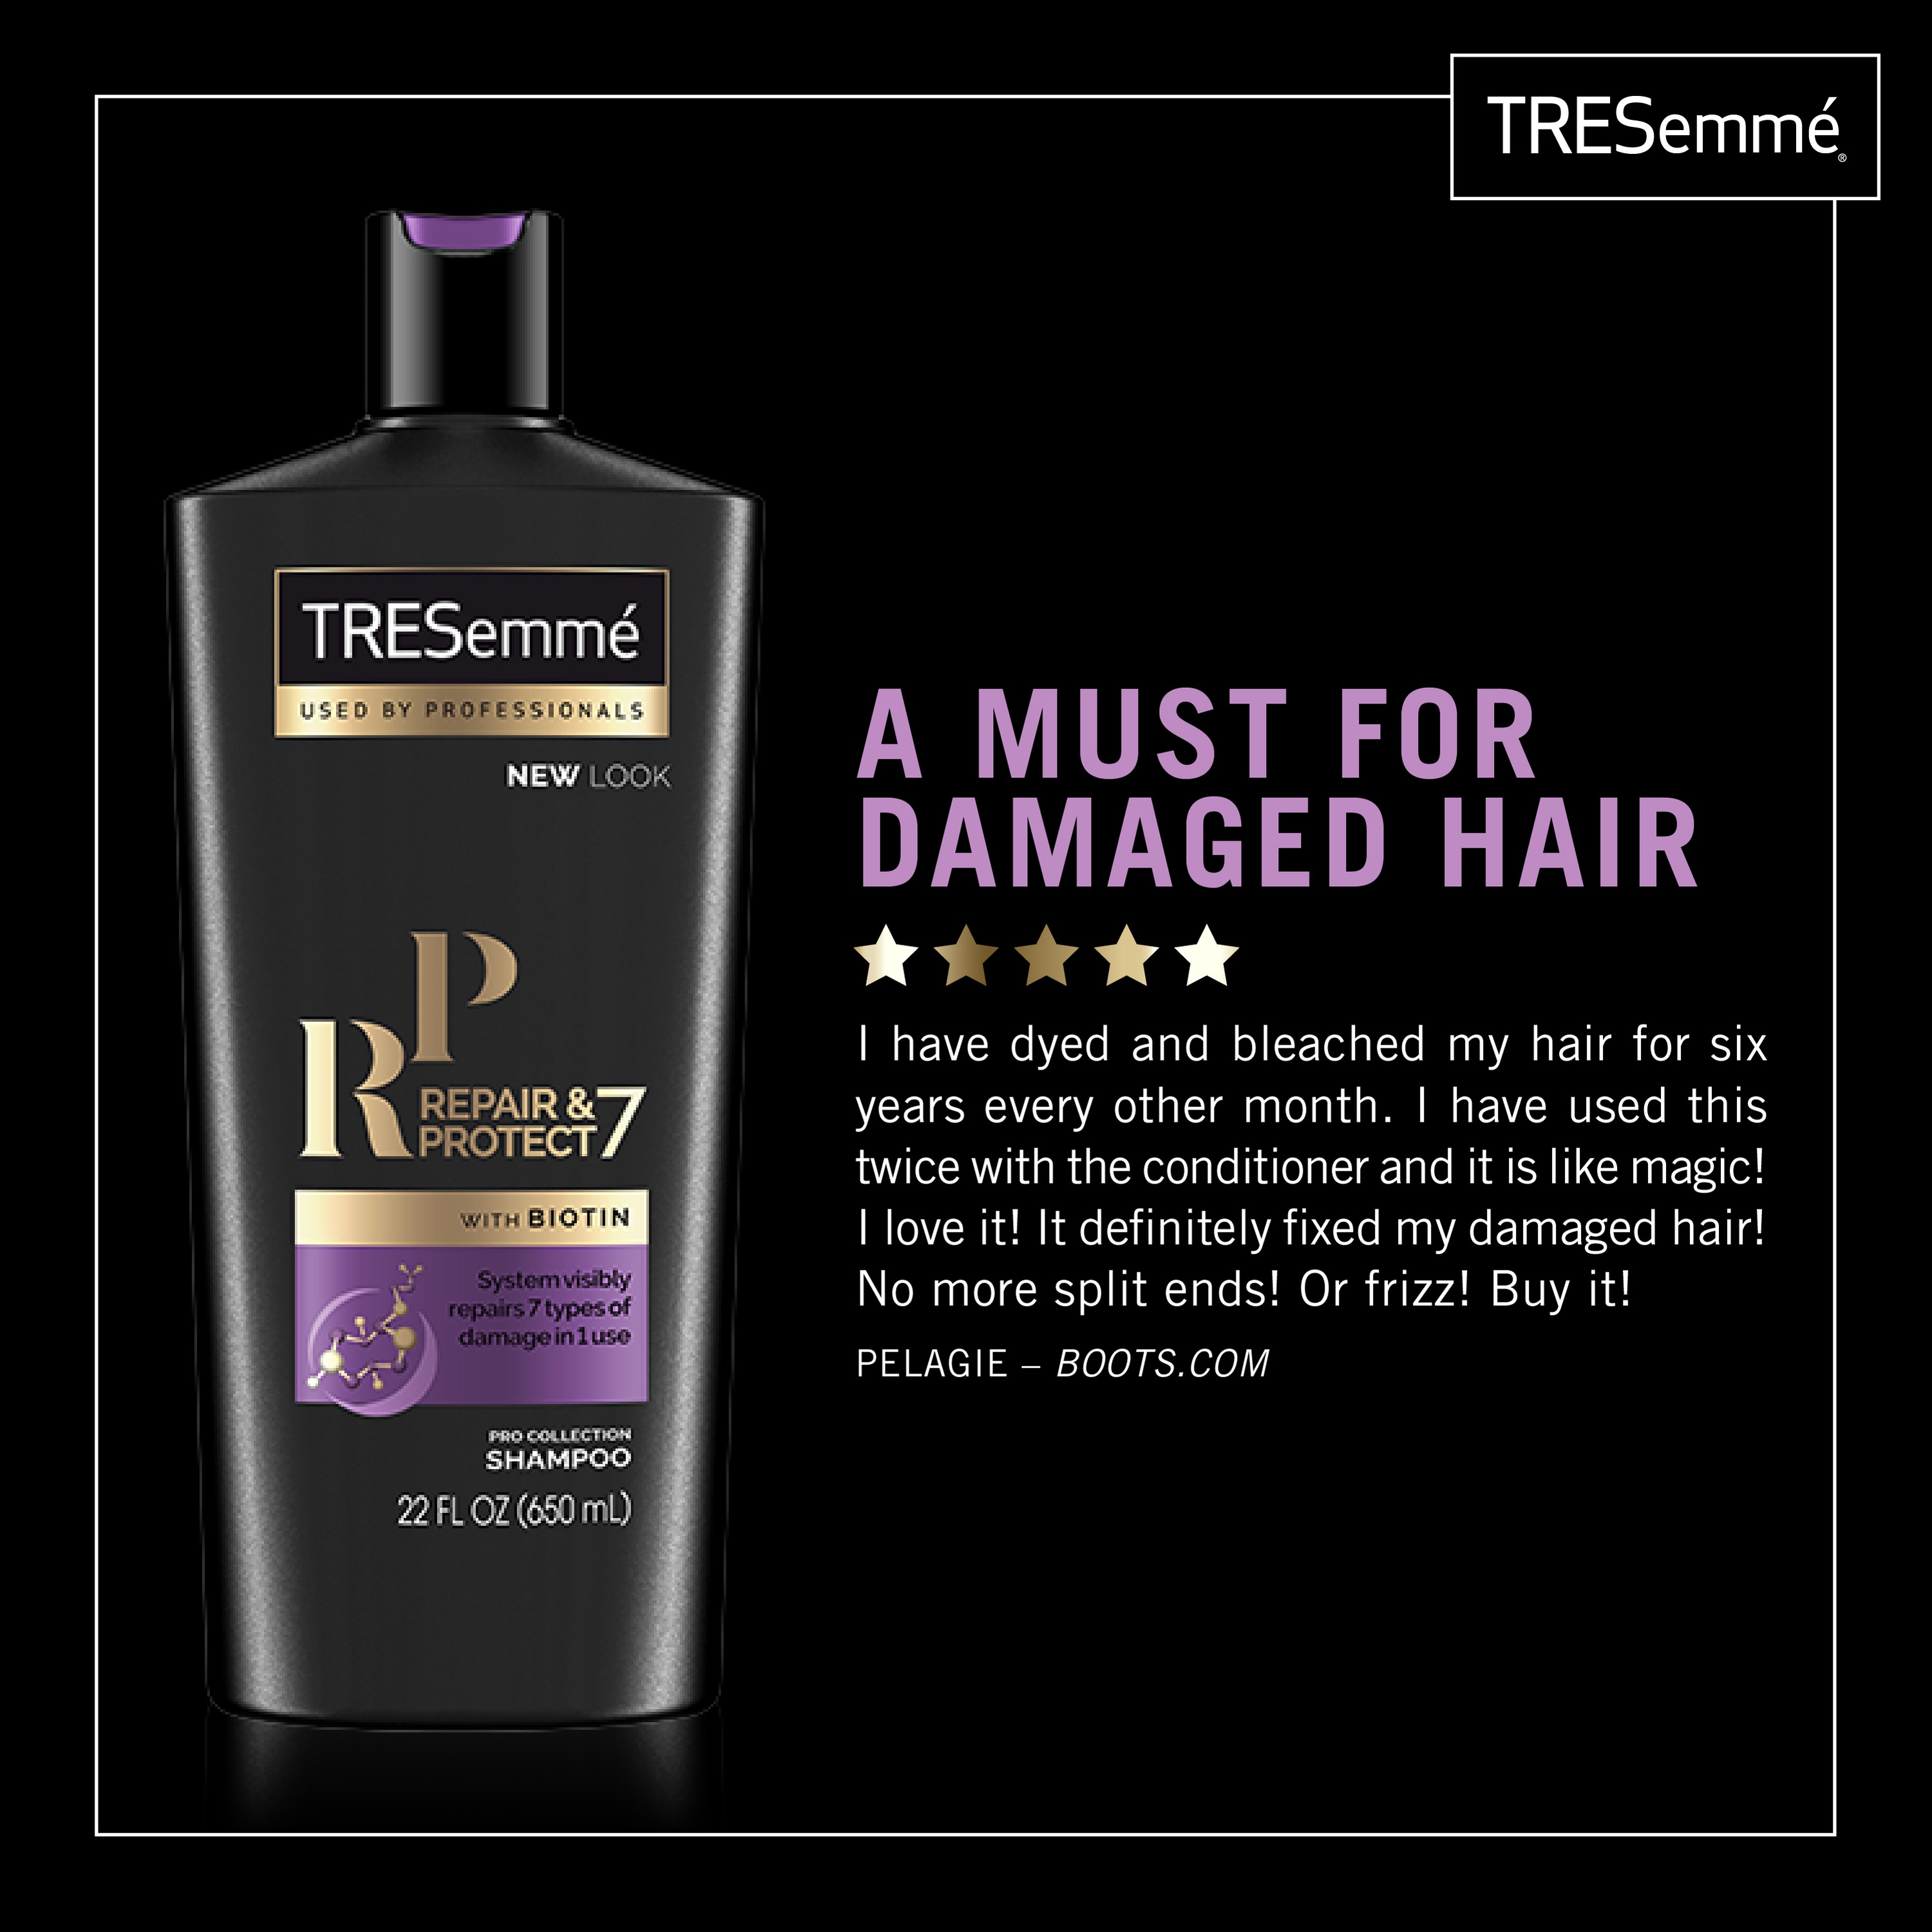 TRESemme 3-Pc Healthy & Protected Blowout Gift Set Repair and Protect with Hair Dryer (Shampoo, Conditioner) ($24.84 Value) - image 2 of 11